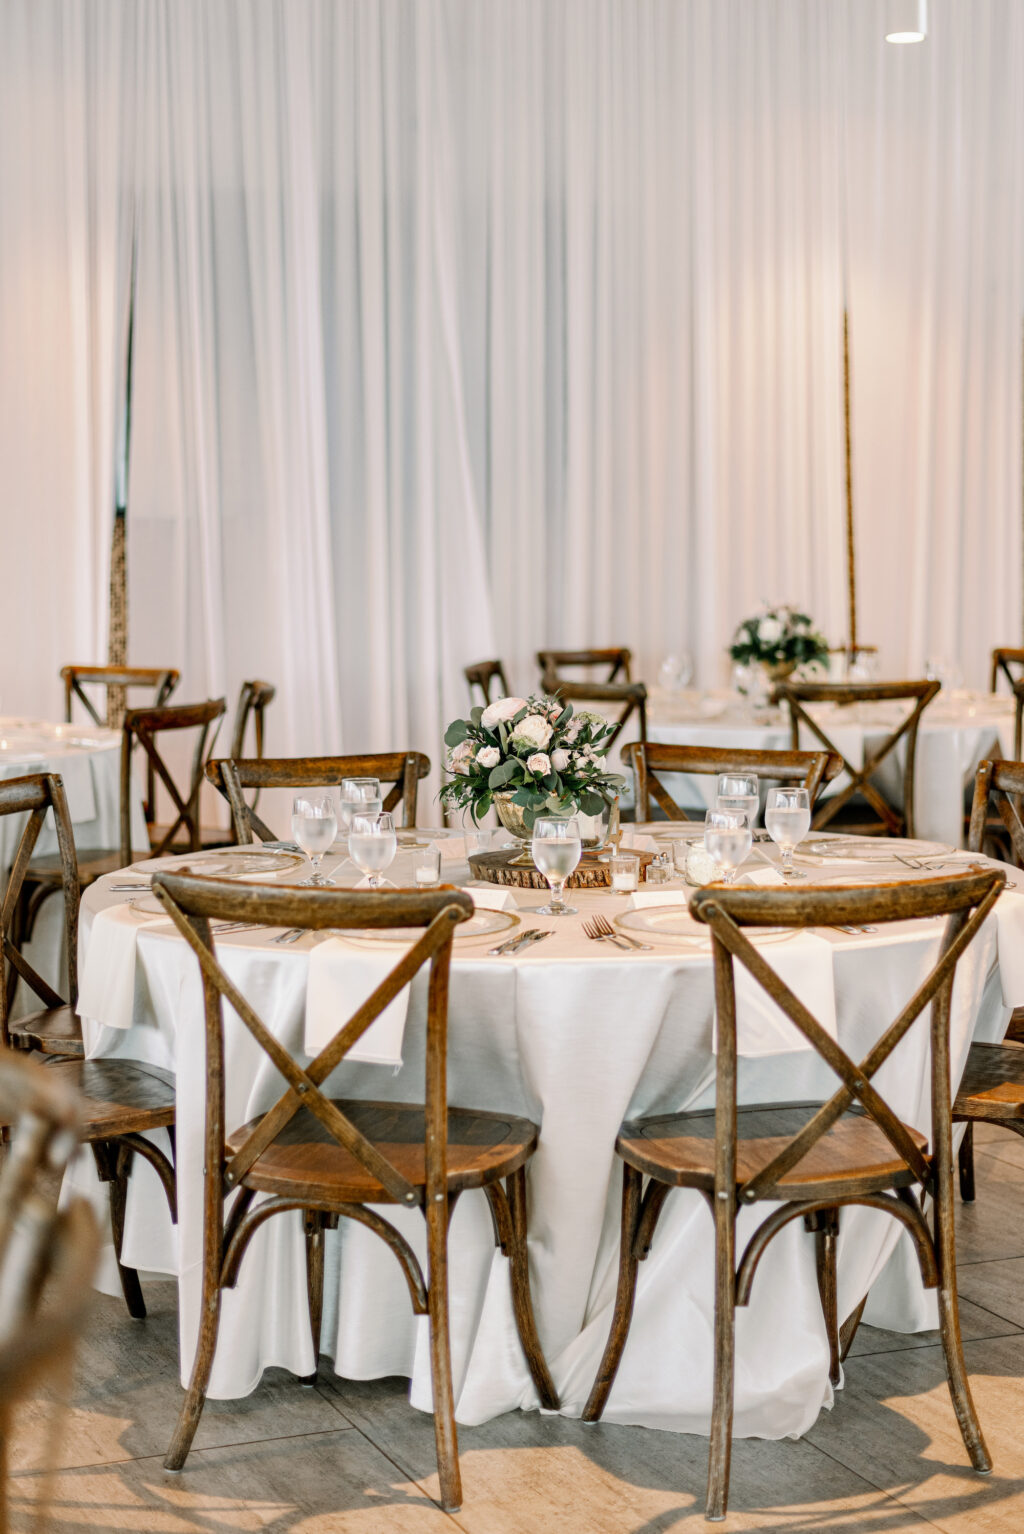 Elegant Rustic Wedding Reception Ideas | Wooden Cross-Back Chairs with White Linens | Tampa Bay Kate Ryan Event Rentals